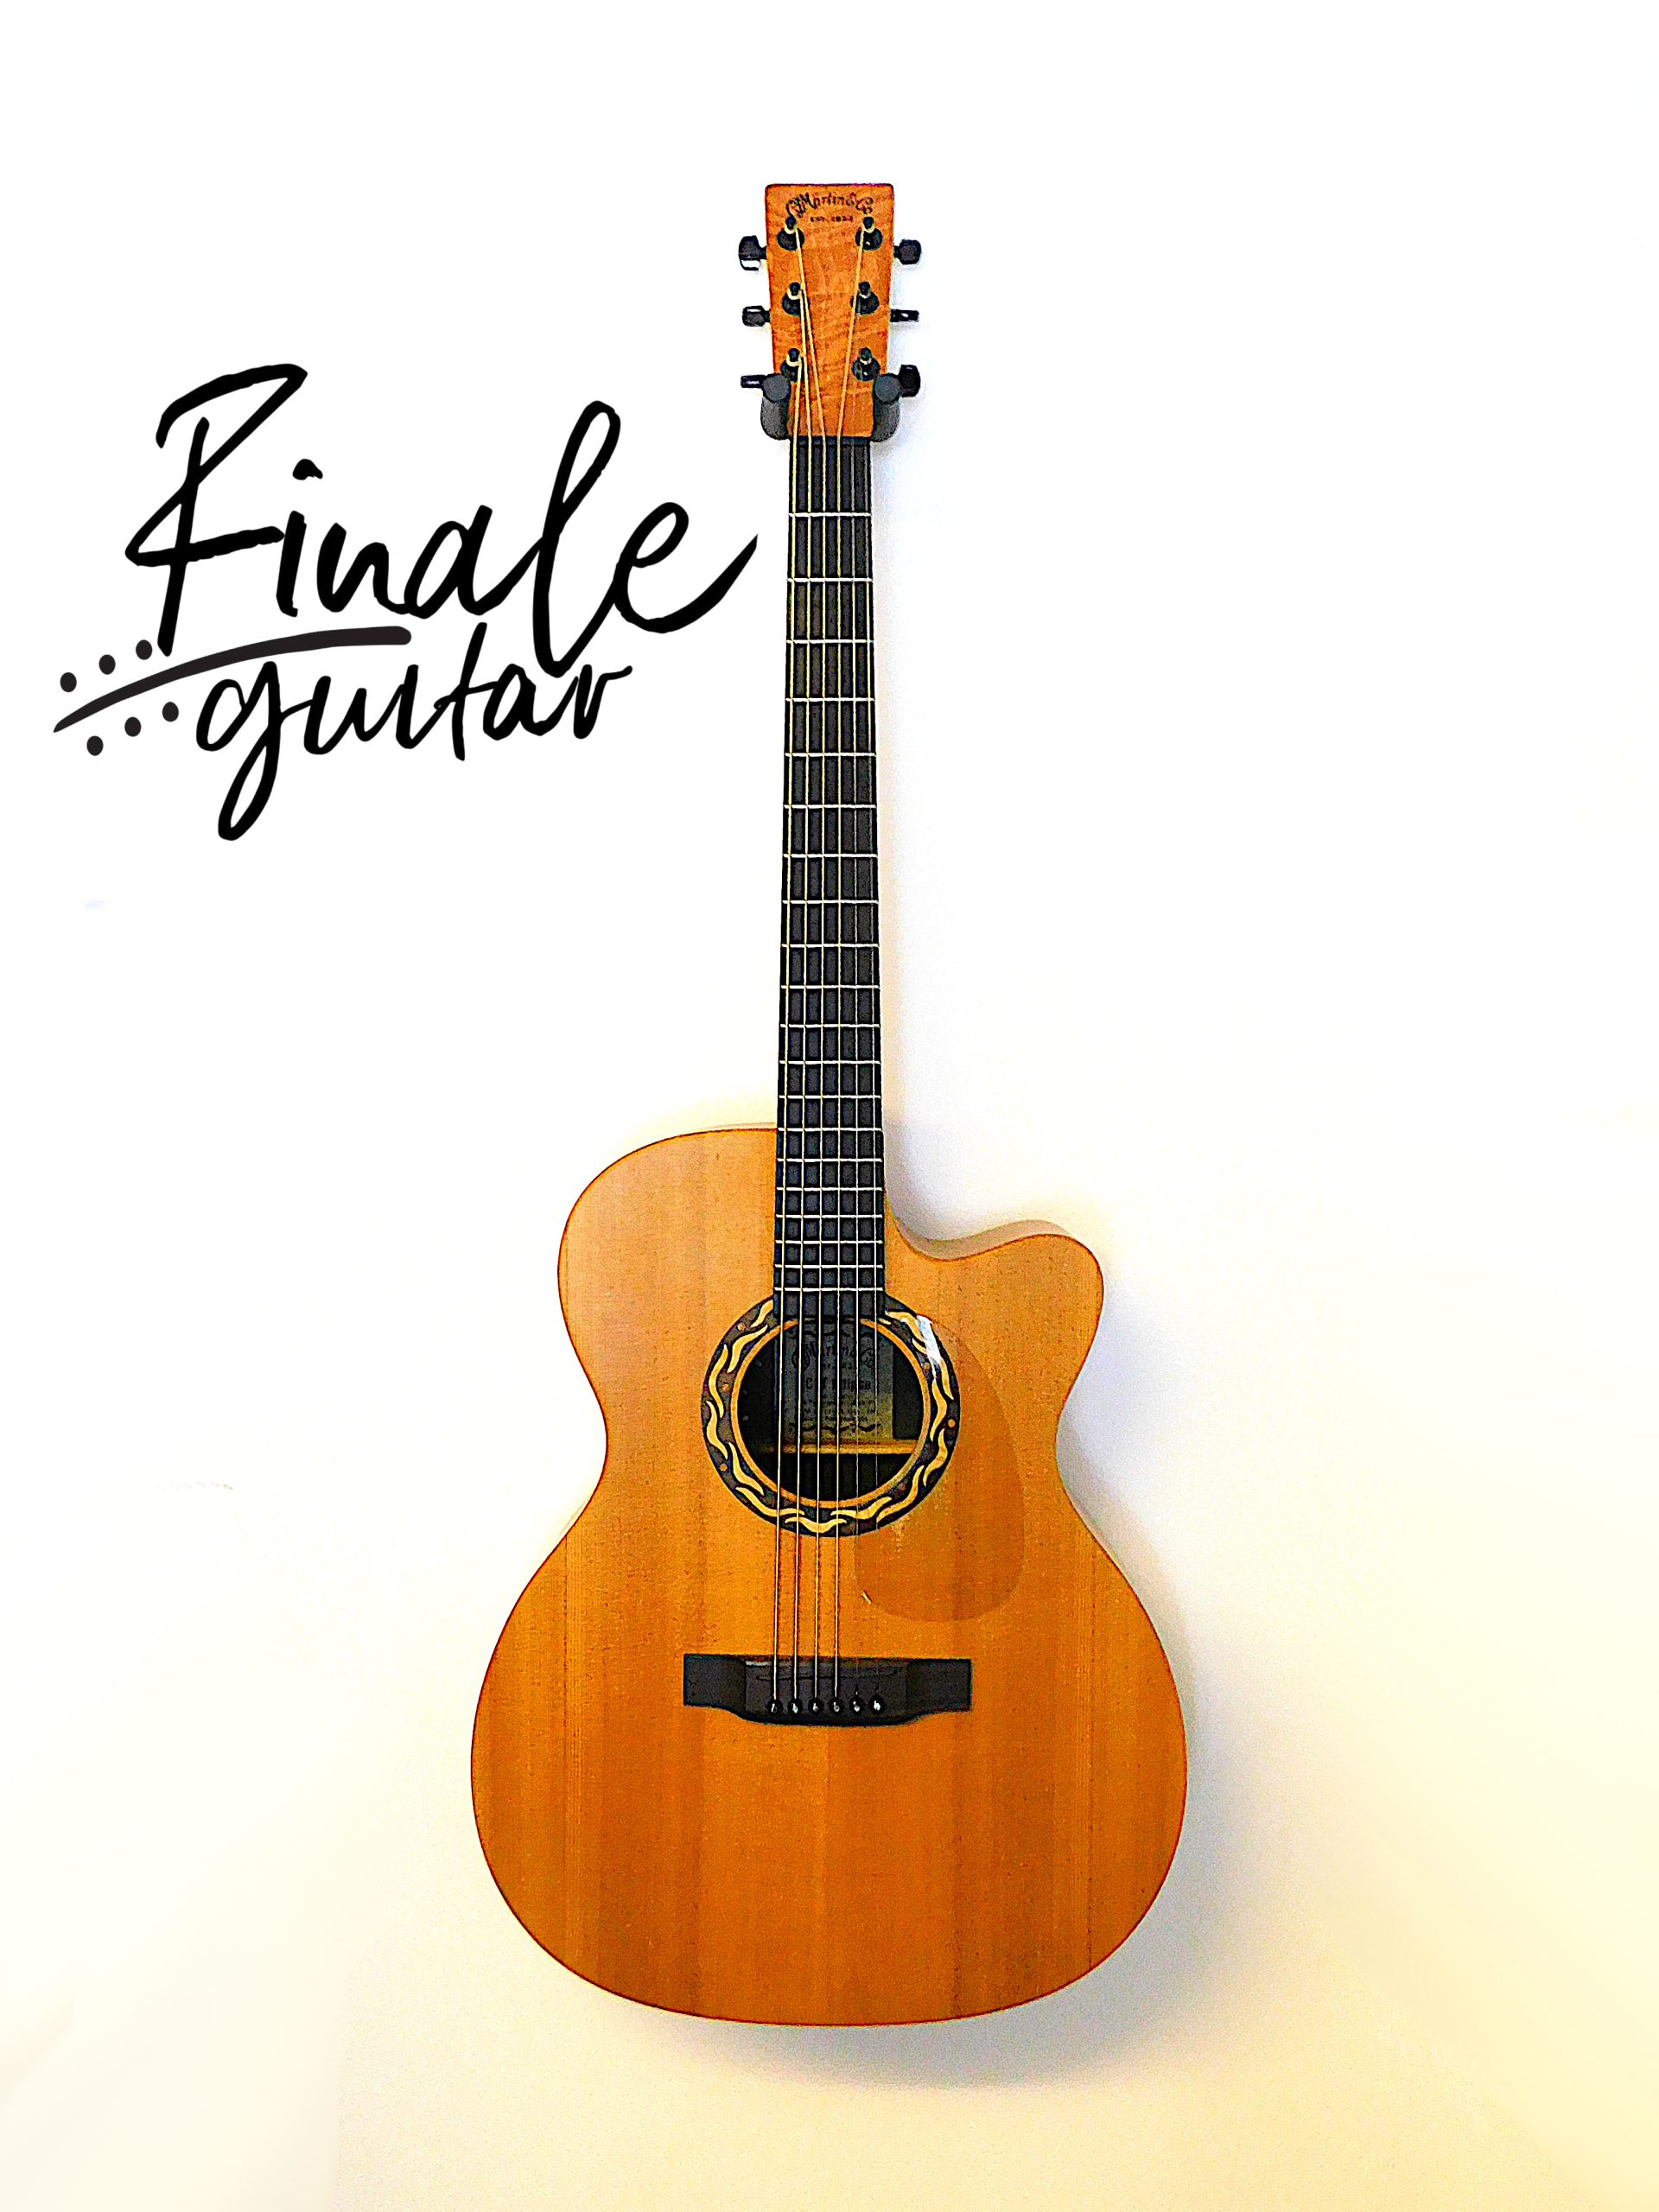 Martin XCT1 Ellipse electro-acoustic with hard case for sale in our Sheffield guitar shop, Finale Guitar